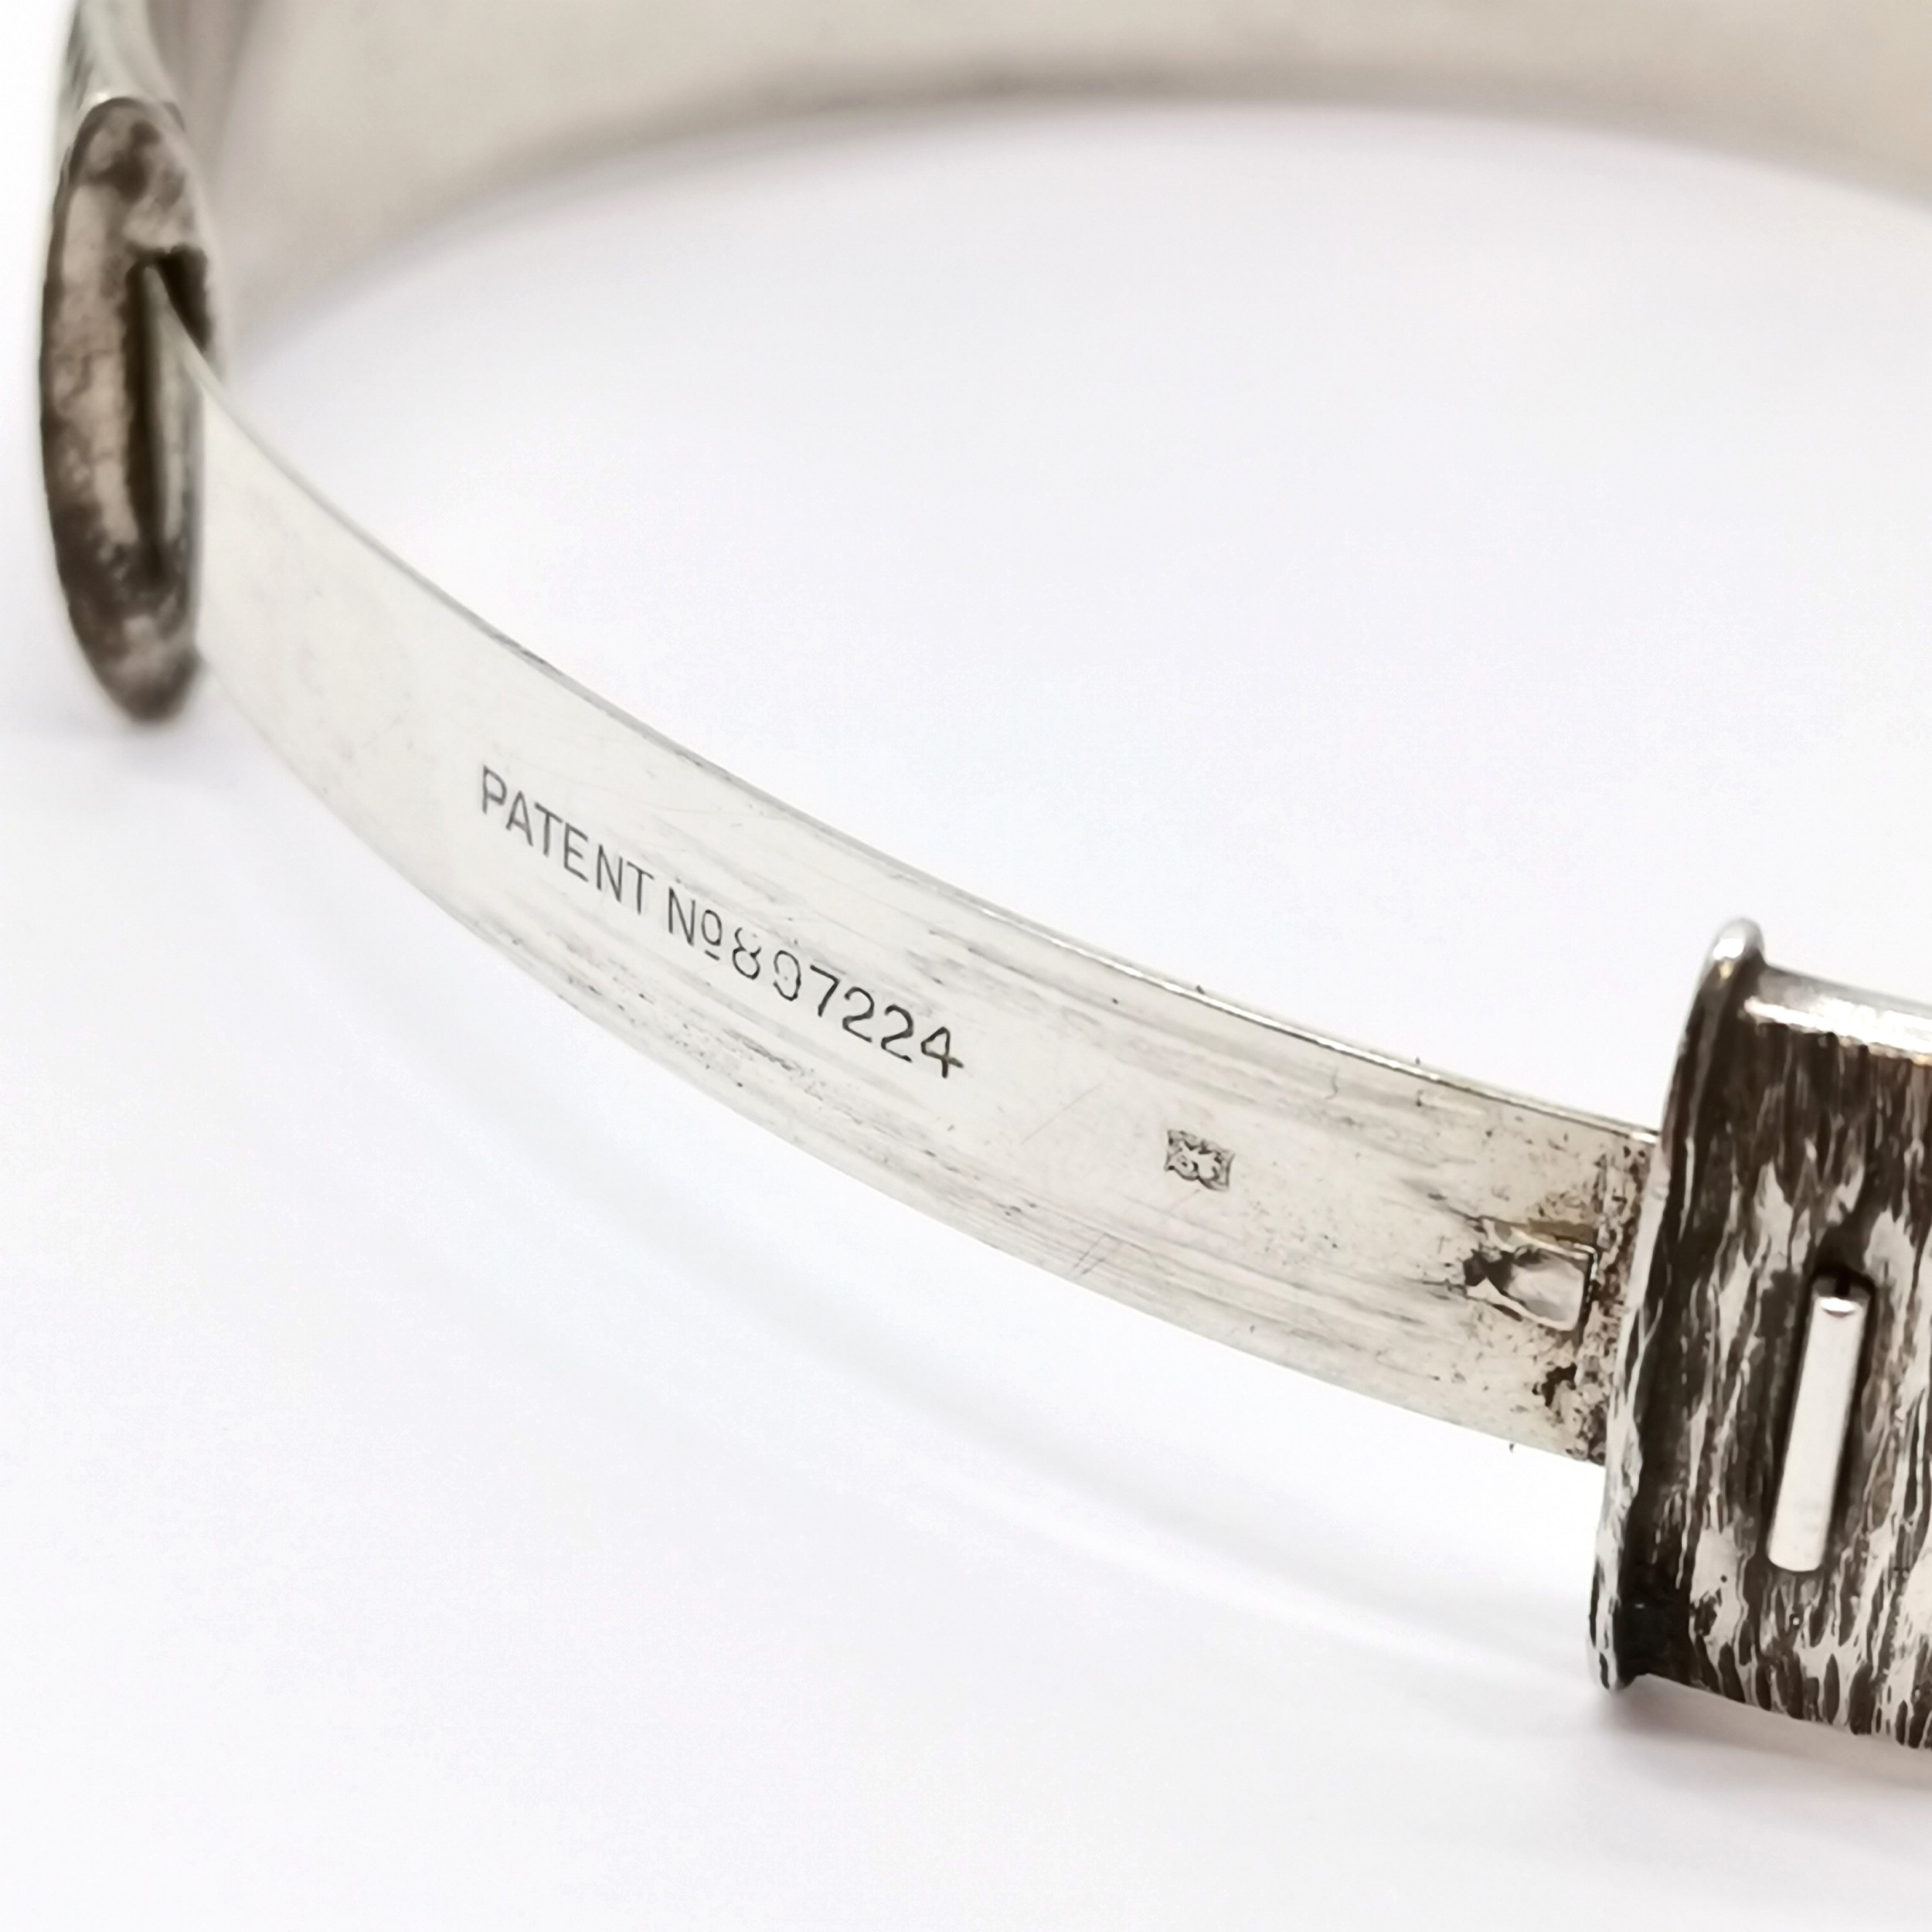 2 silver bangles - bark effect 1972 by Rigby & Wilson (Pat 897224) & 1963 by T H Ltd (slight - Image 4 of 4